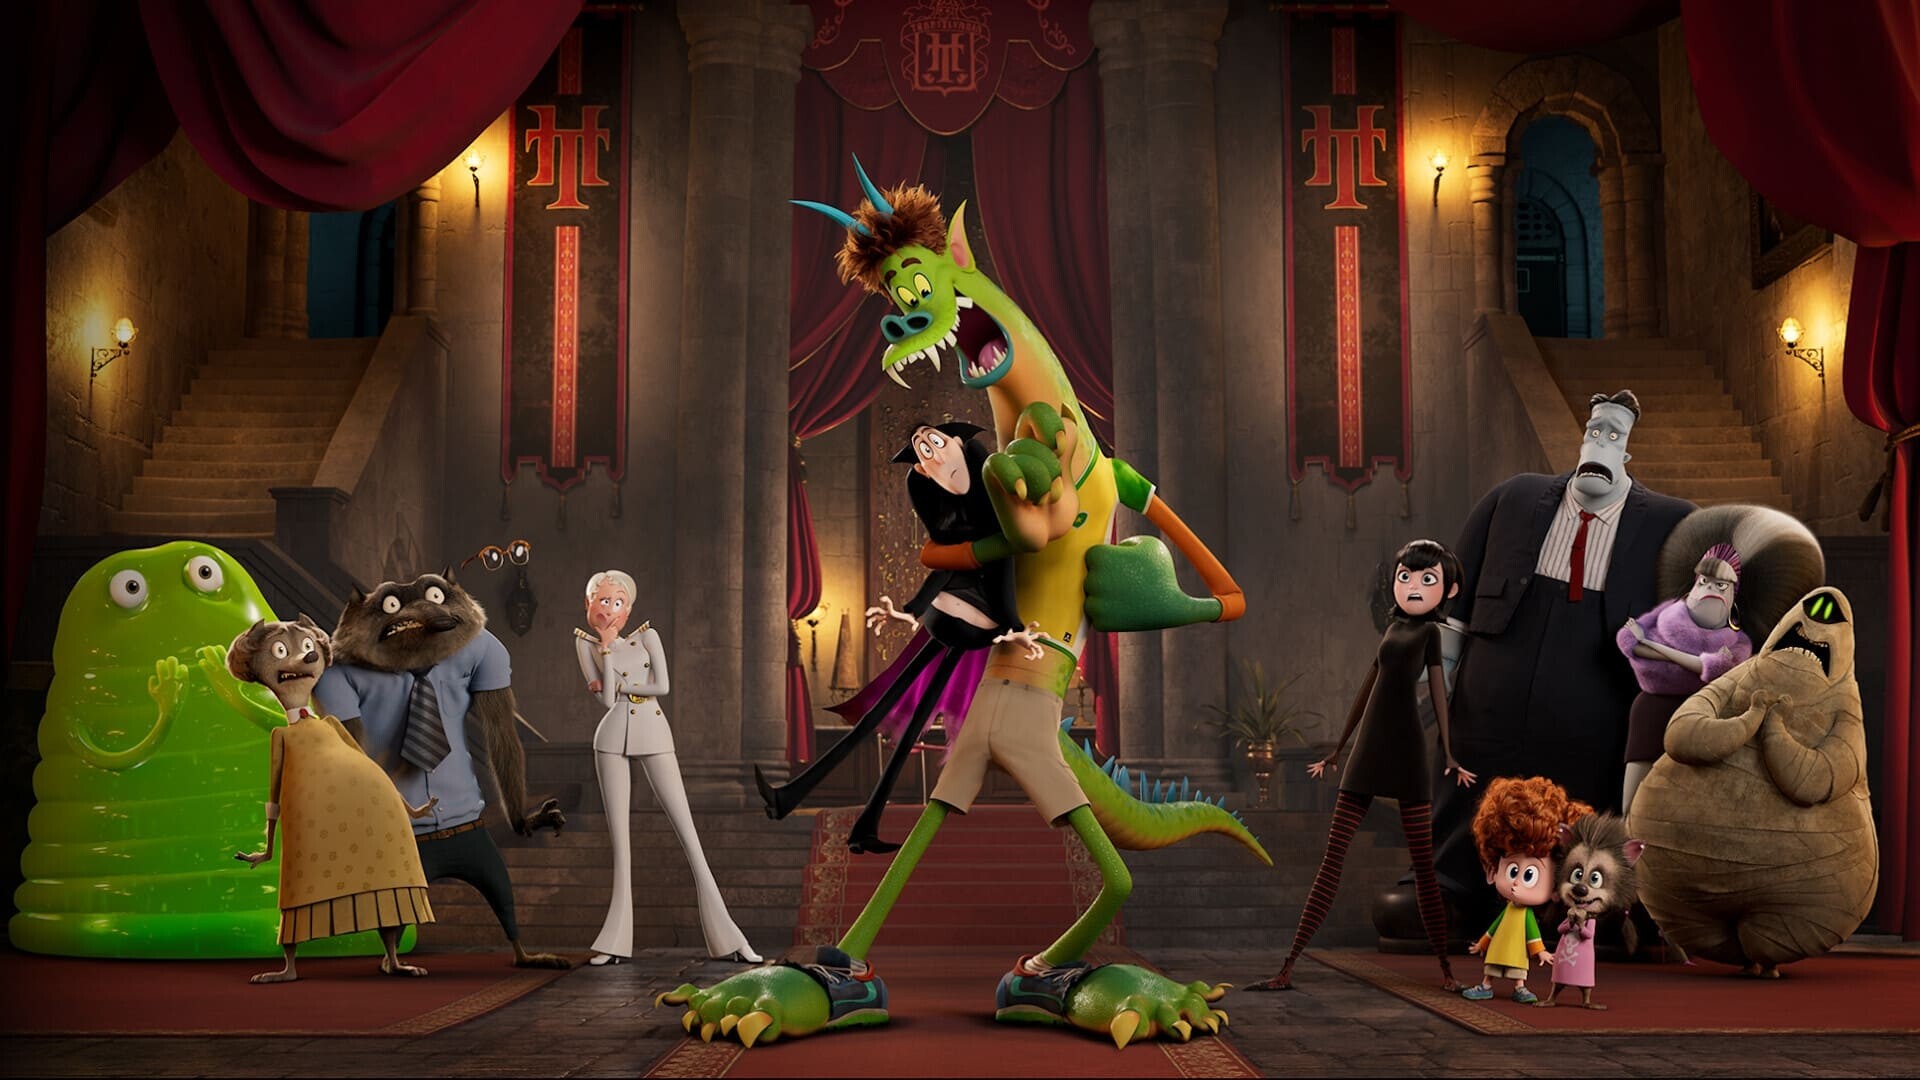 Hotel Transylvania: Transformania: Movie plot, Johnny turns into a monster and everyone else becomes human. 1920x1080 Full HD Background.